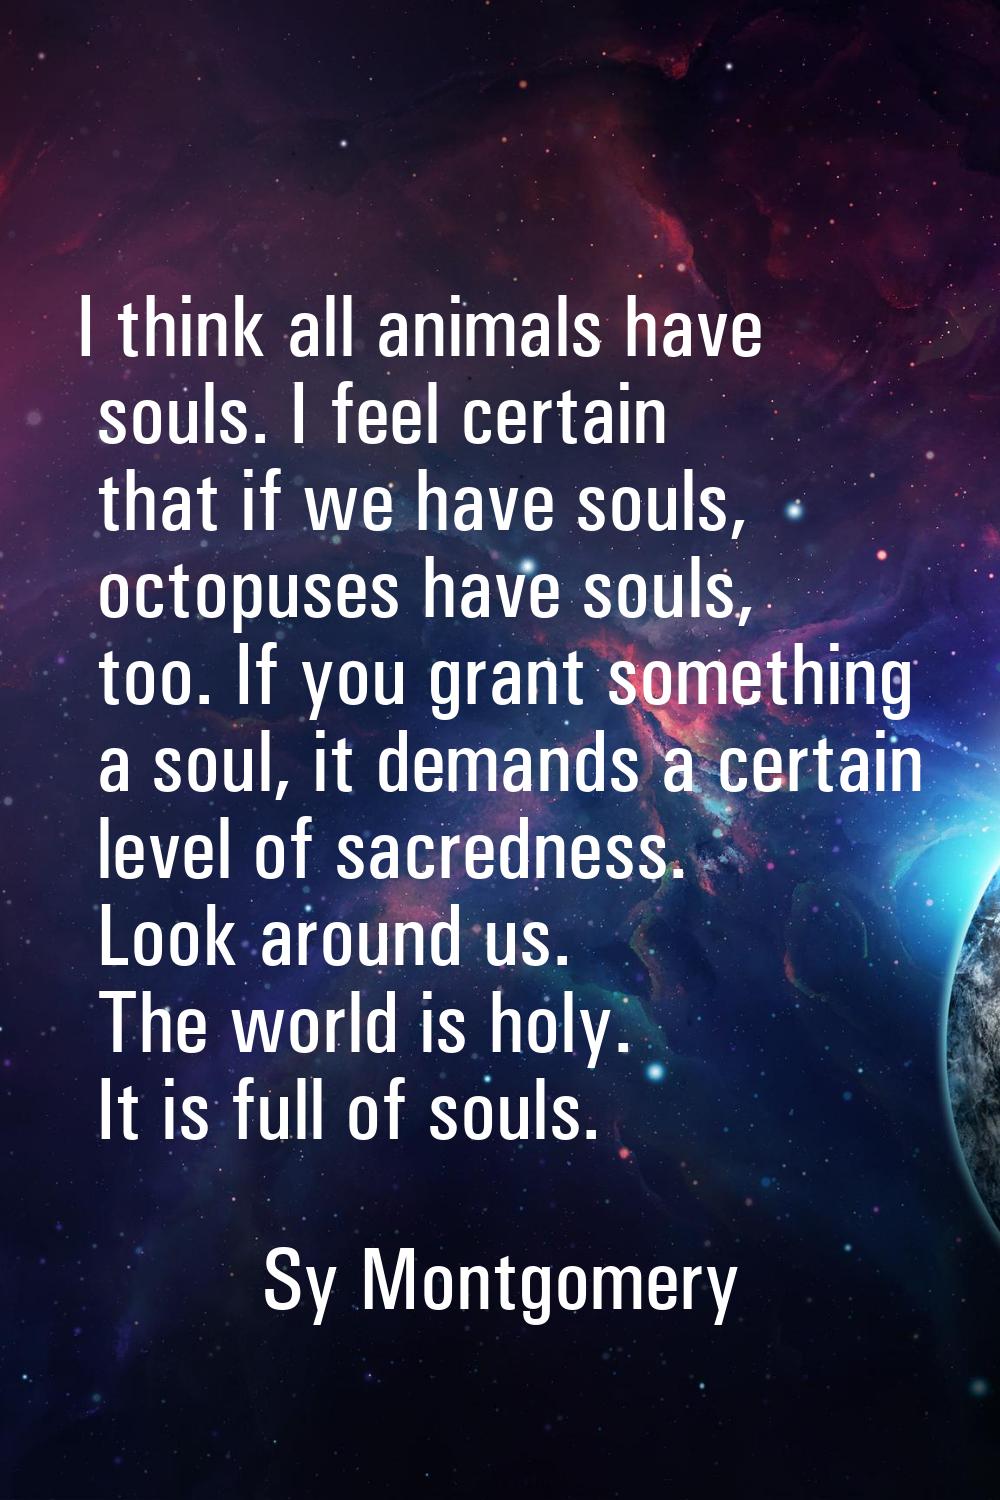 I think all animals have souls. I feel certain that if we have souls, octopuses have souls, too. If